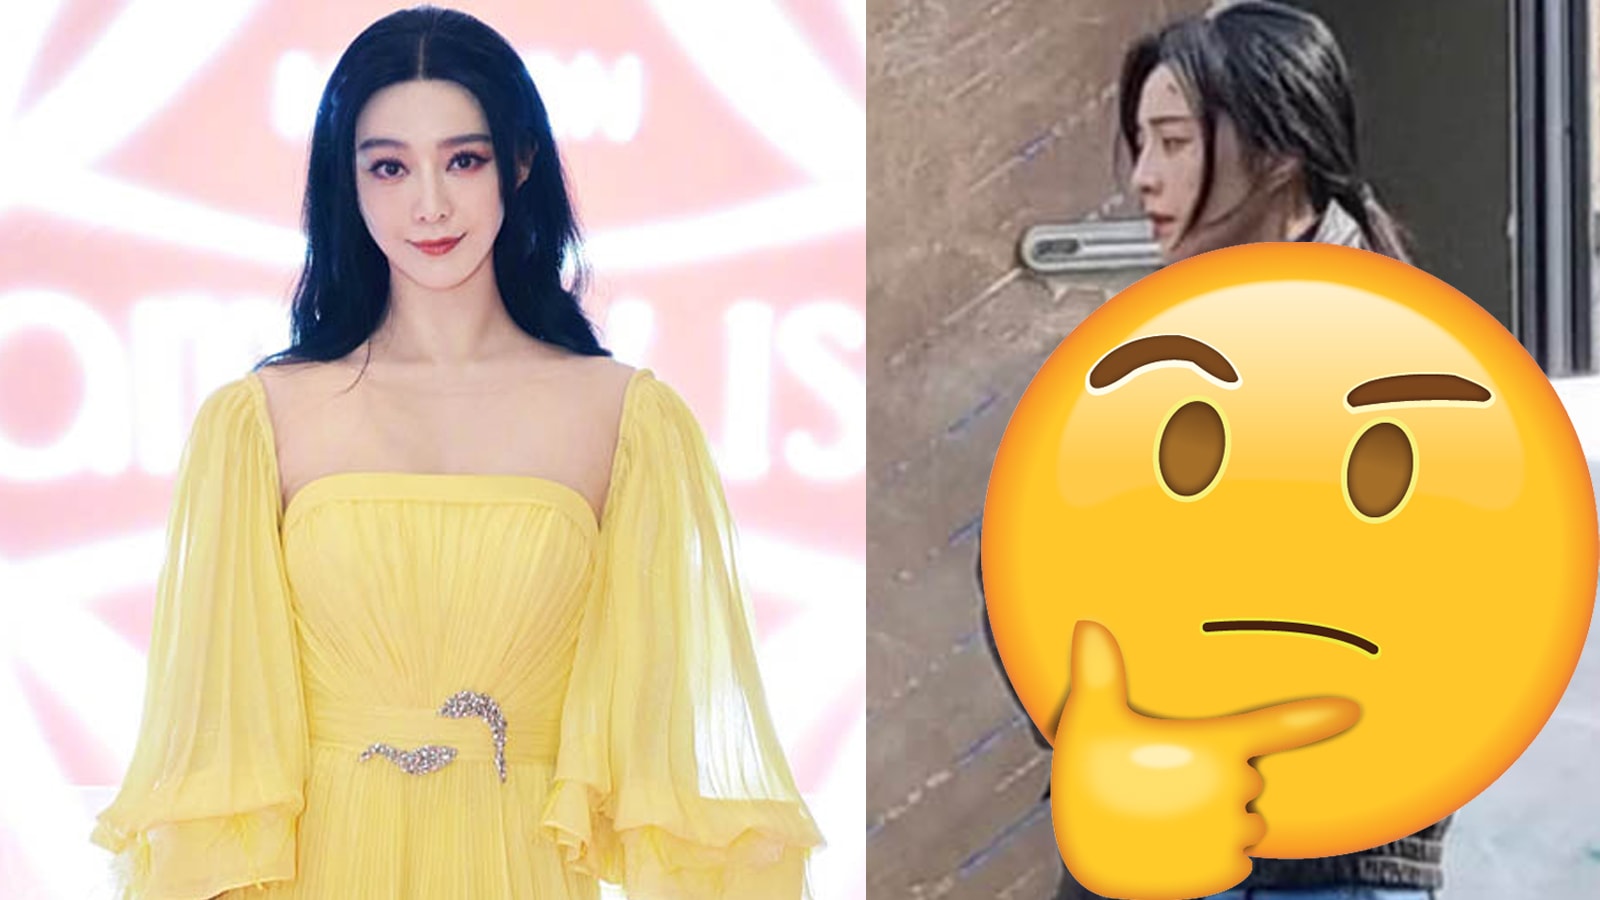 Fan Bingbing Spotted Looking “Disheveled” In Korea, Where She's Filming Comeback Drama - TODAY